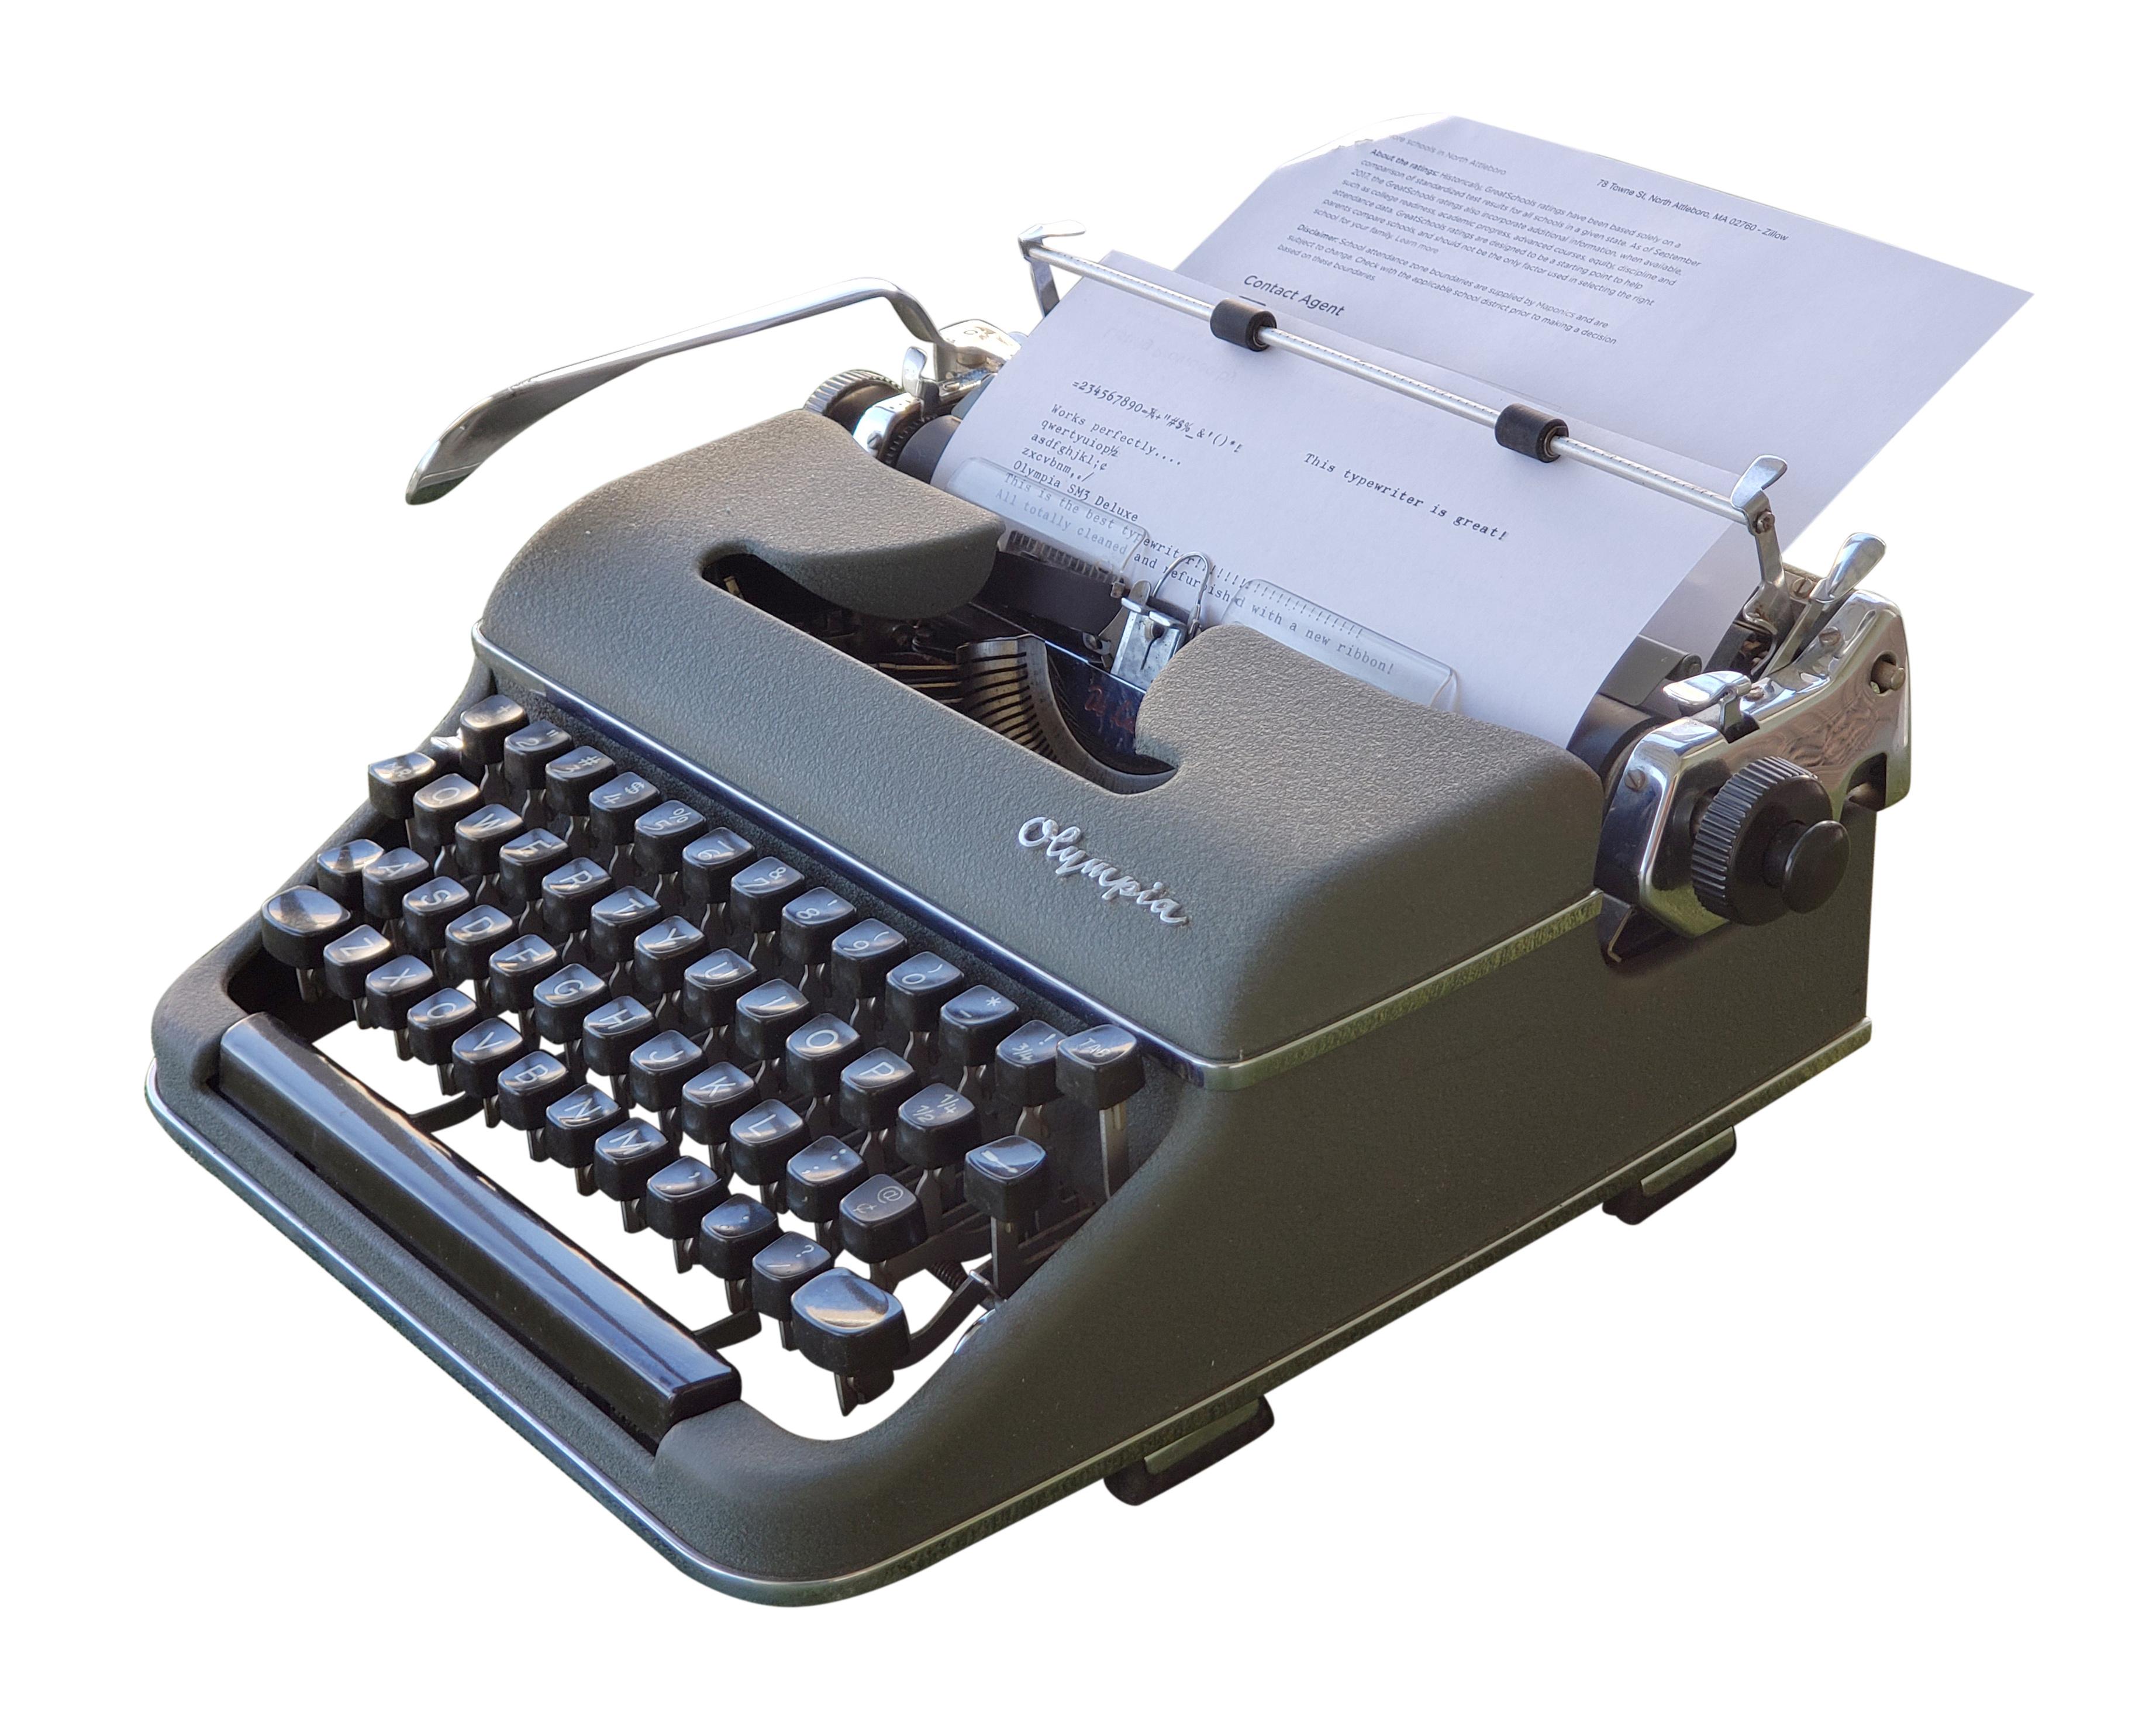 Vintage Olympia De Luxe green typewriter with original gray case. This typewriter has been professionally serviced and is in excellent working condition. This can be viewed at our Scranton, Pennsylvania location. Please inquire for the exact address.